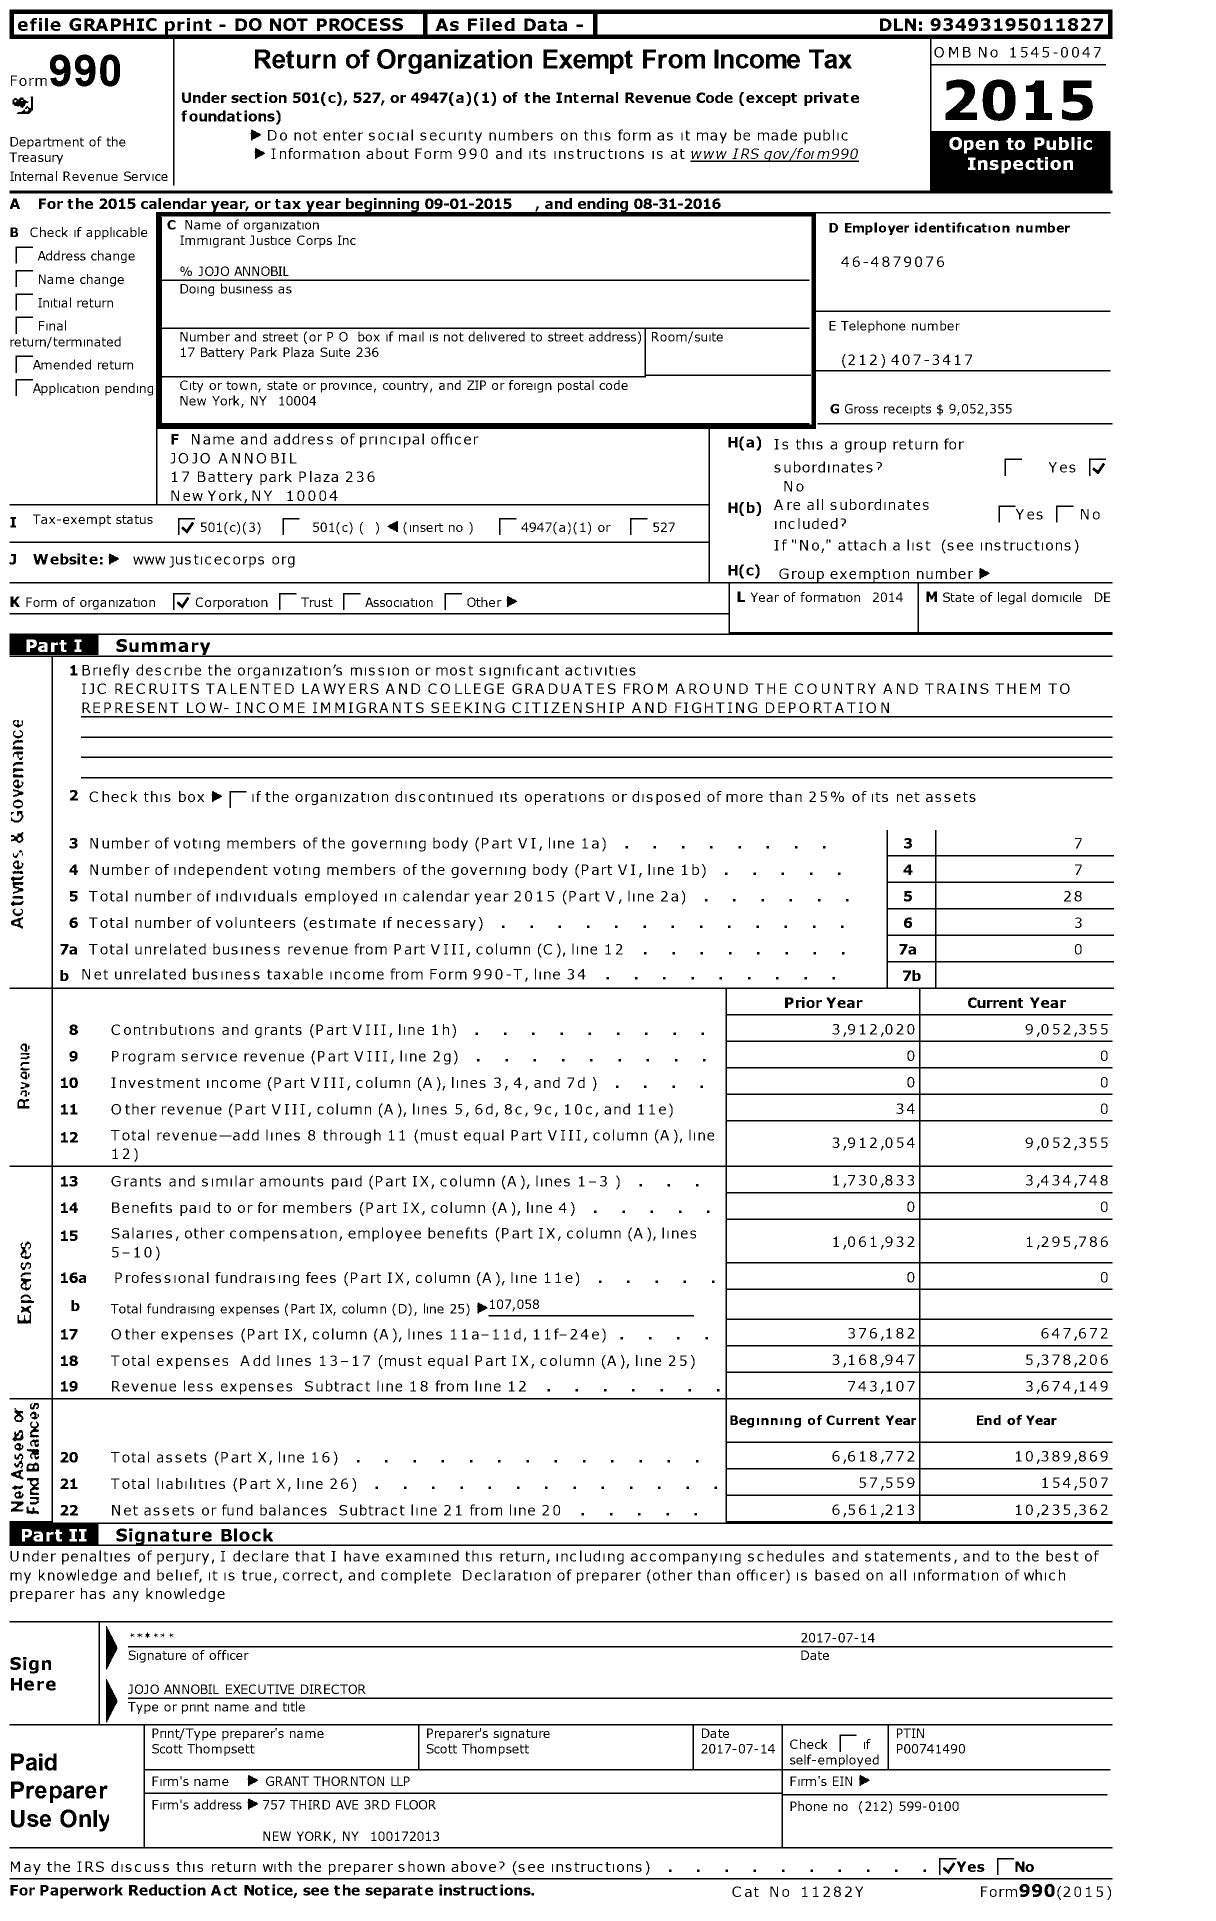 Image of first page of 2015 Form 990 for Immigrant Justice Corps (IJC)